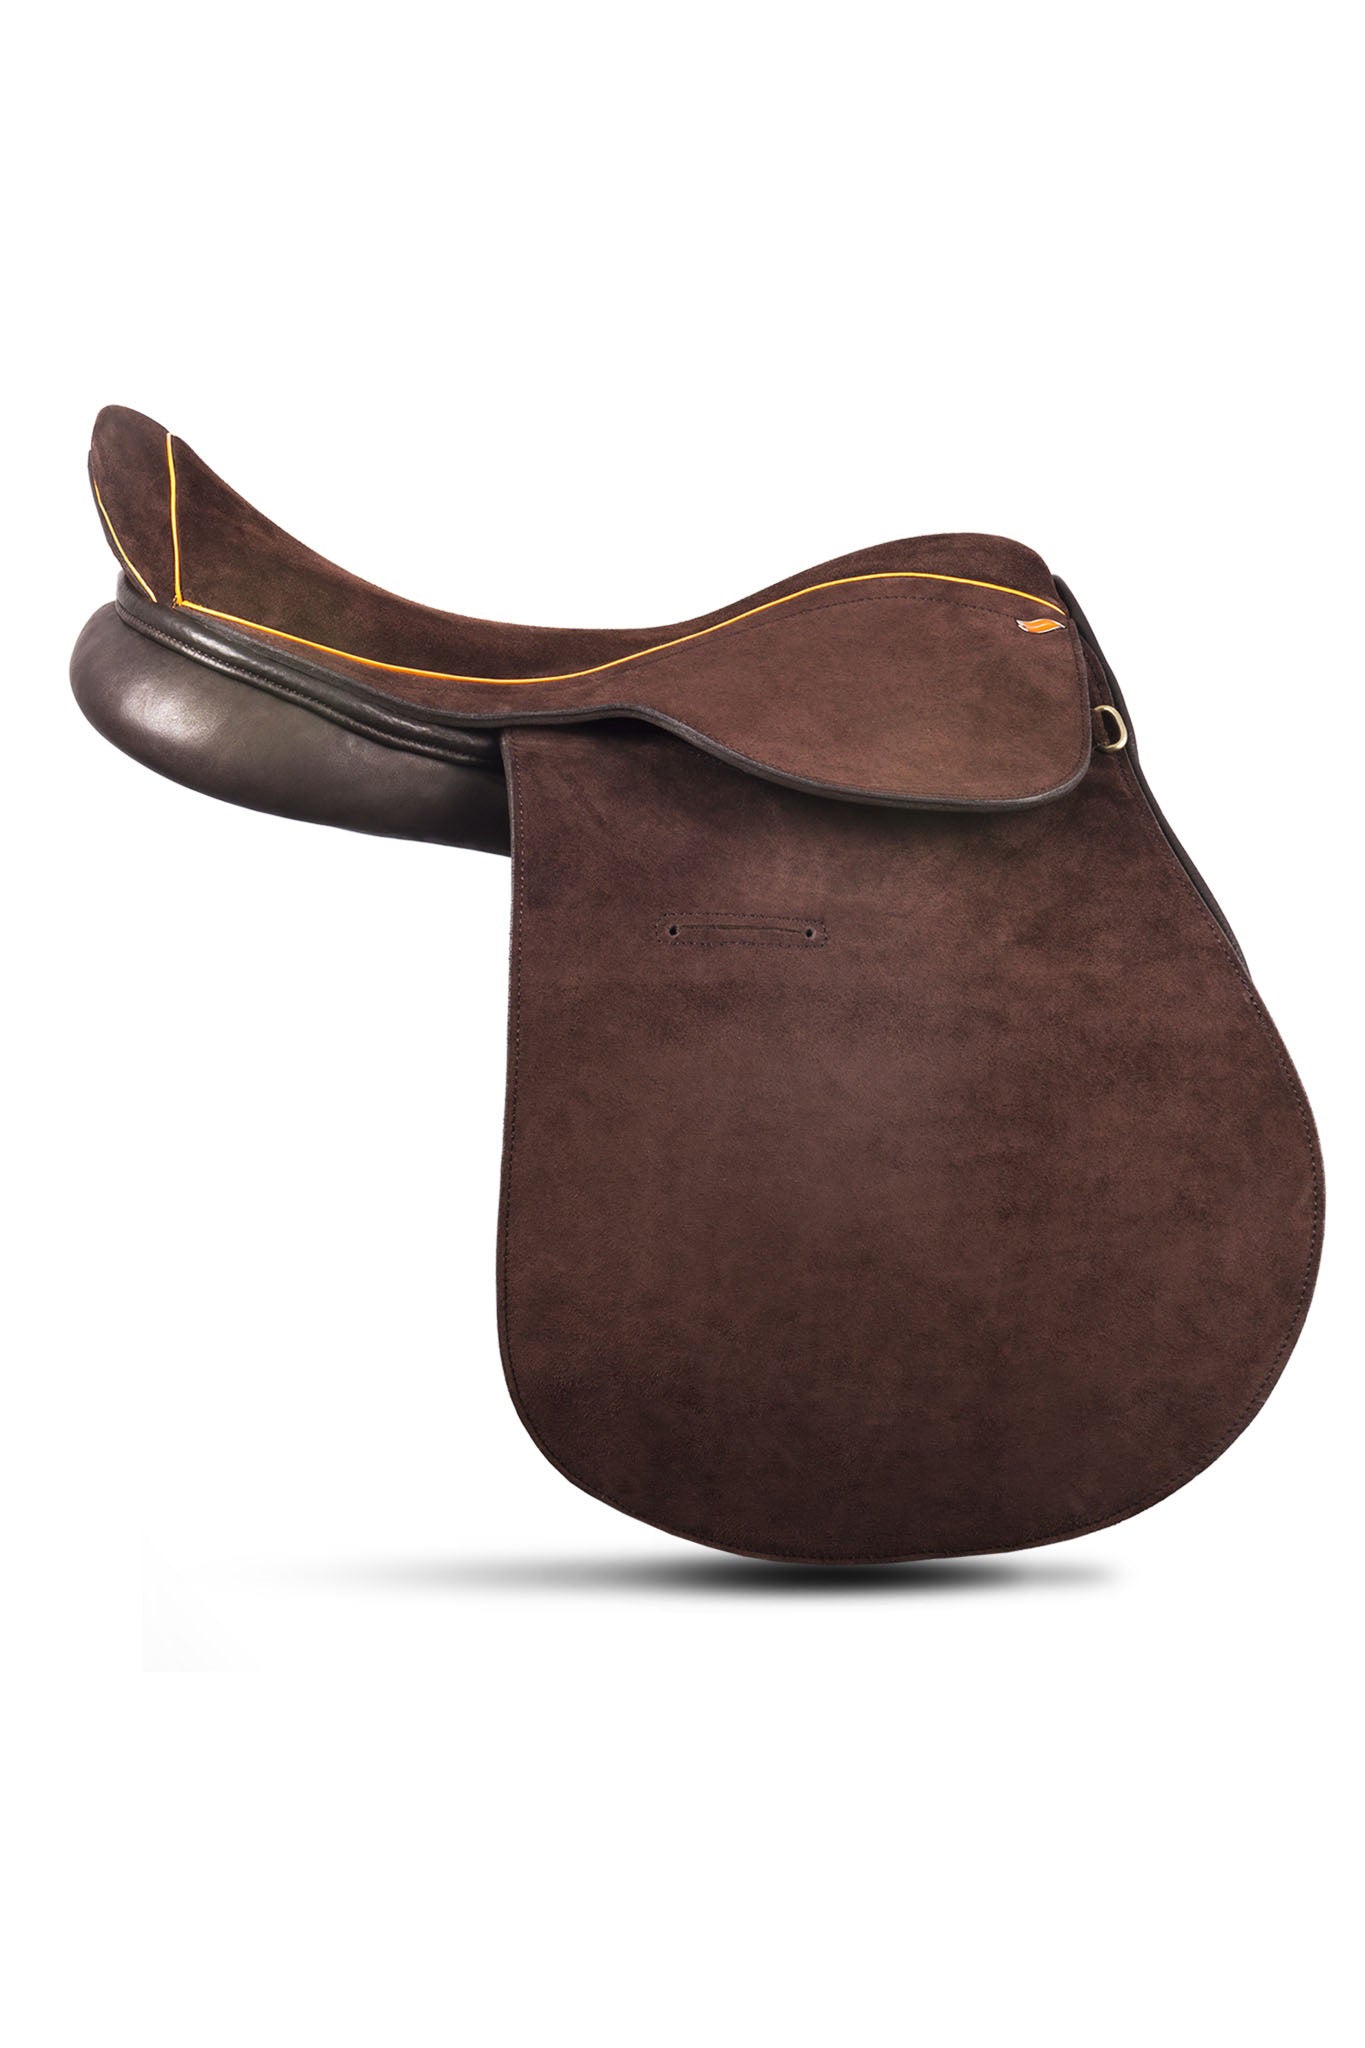 New All Suede Polo Saddle